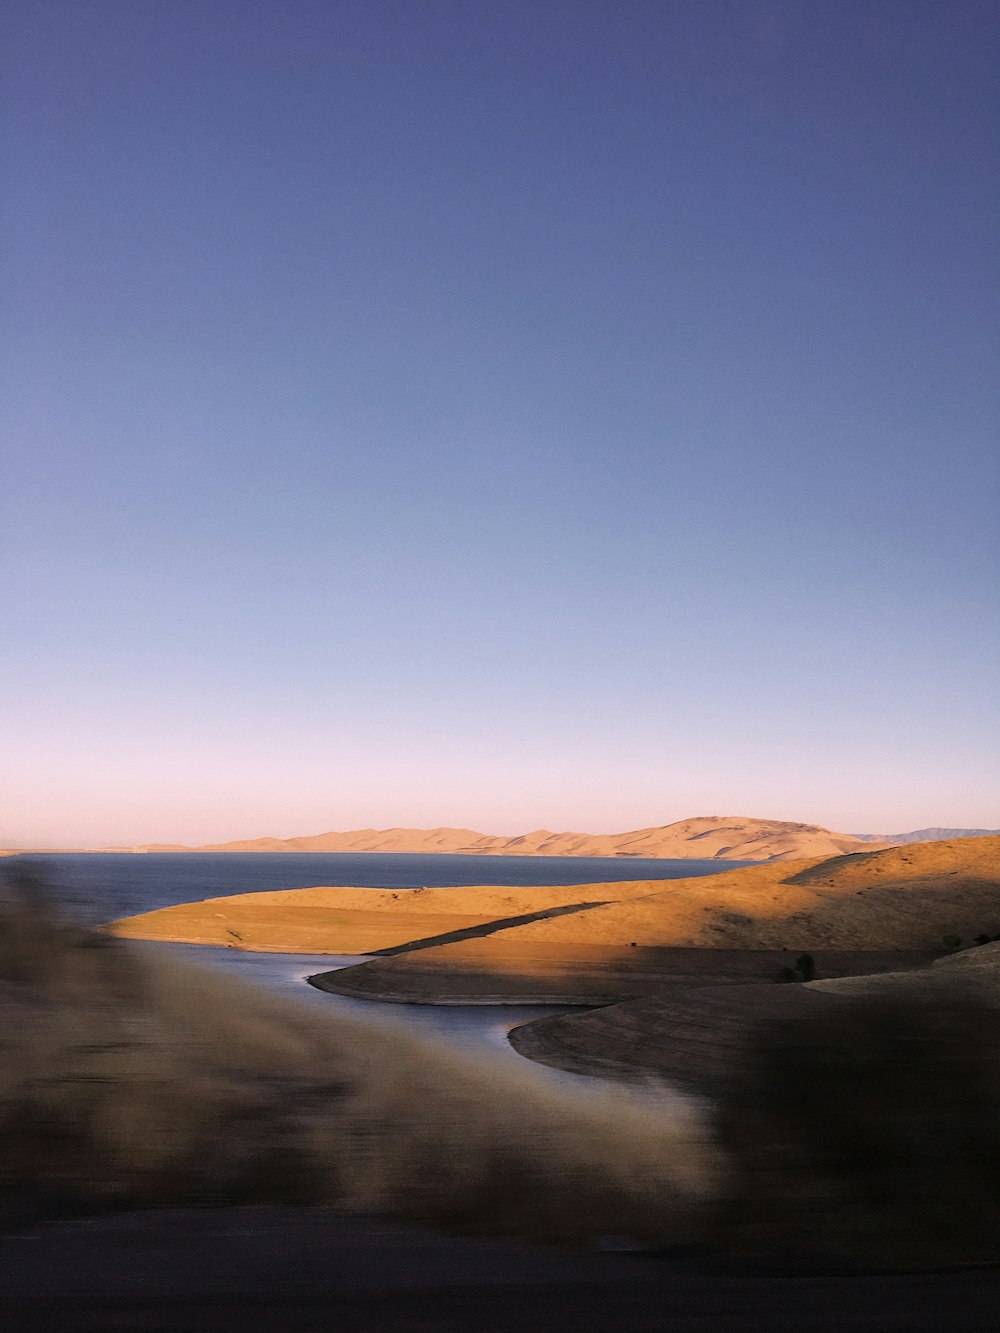 a view of a body of water from a moving vehicle